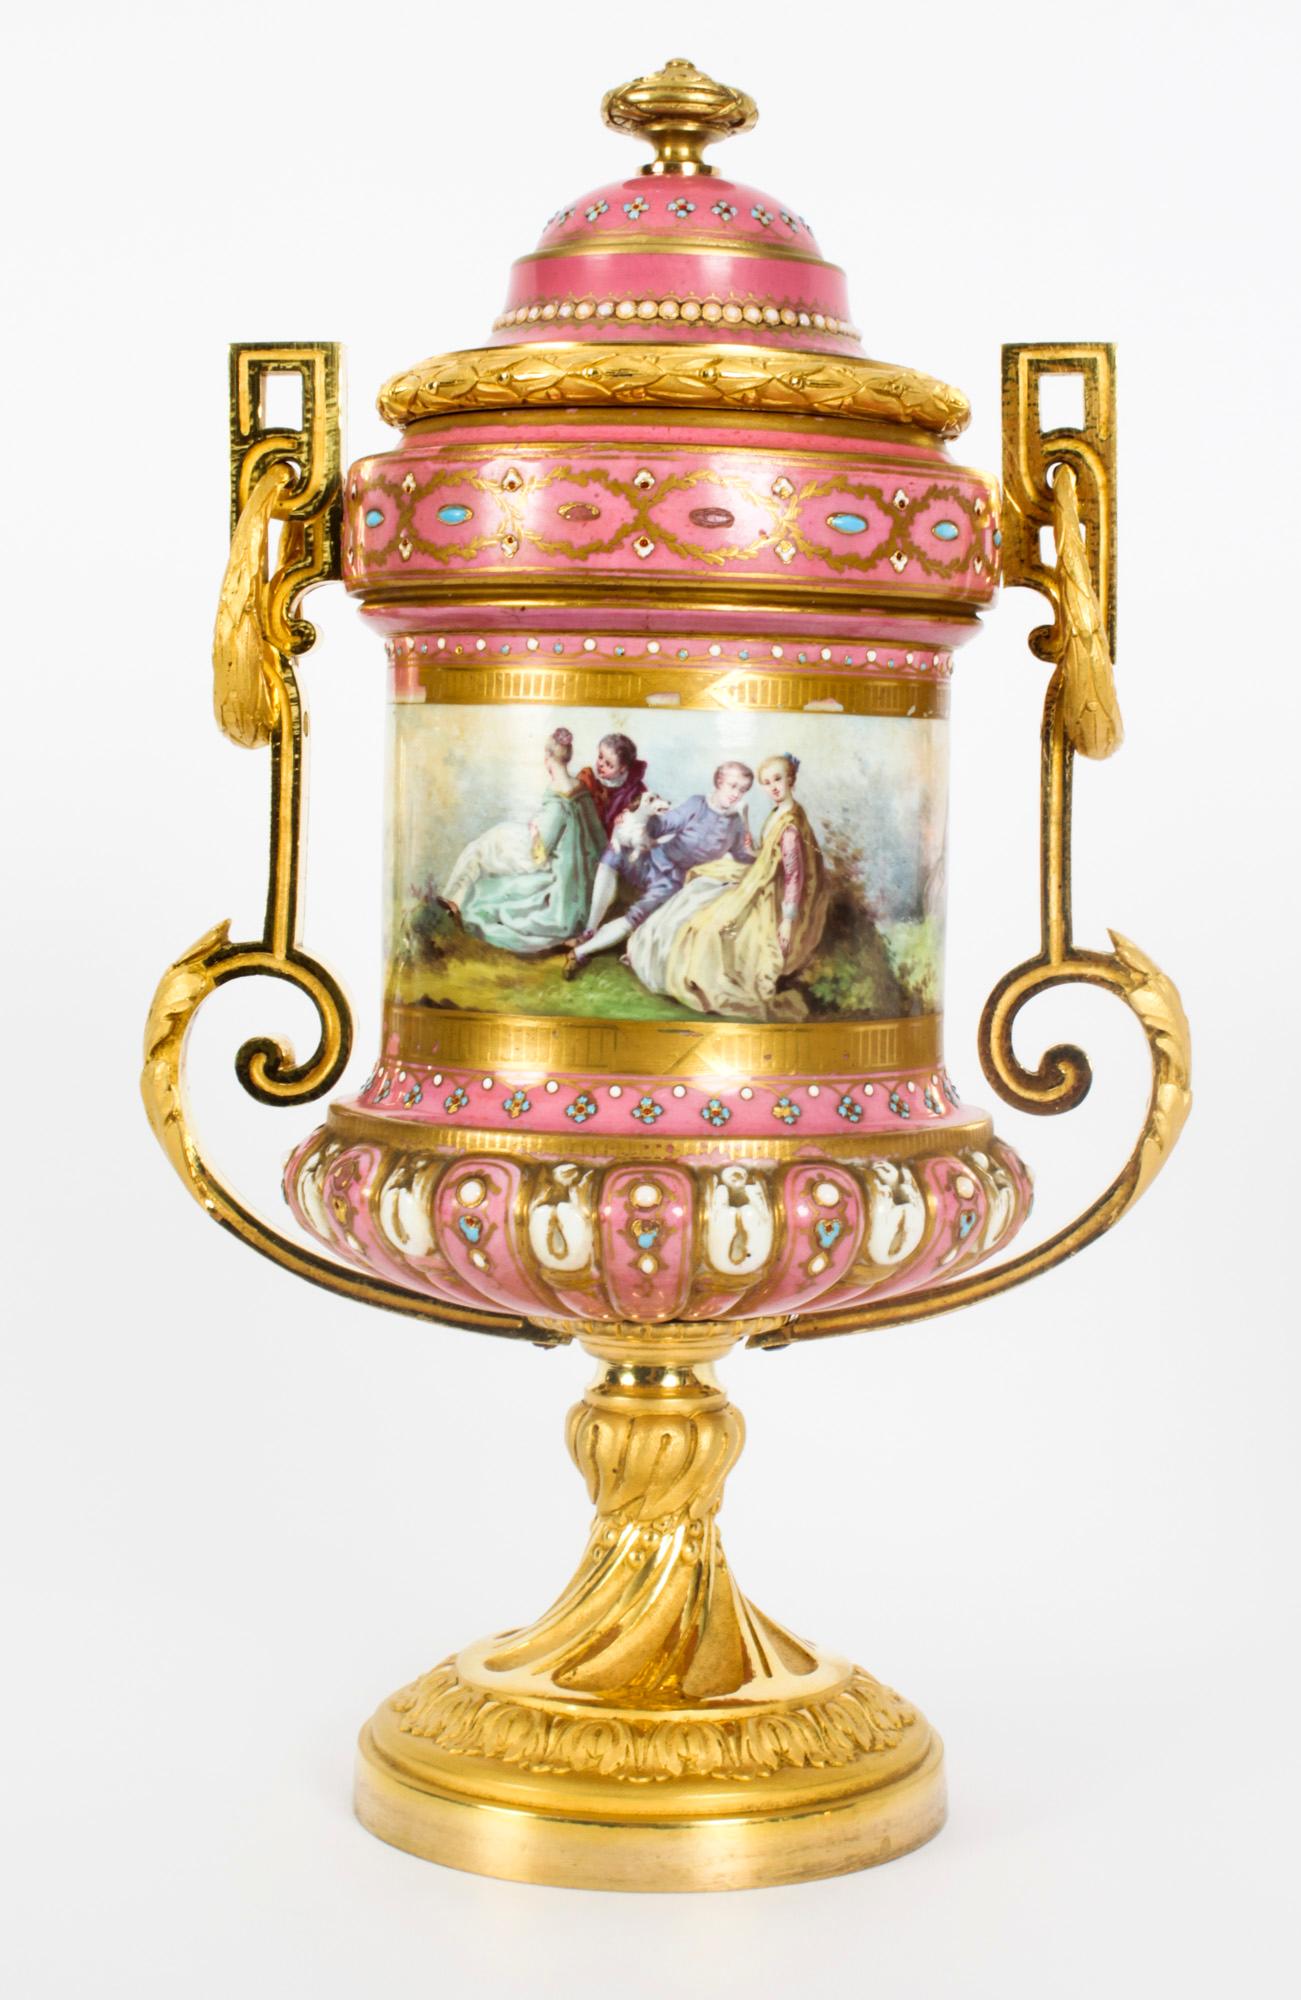 This is a beautiful antique pair of French Sevres porcelain and ormolu mounted lidded vases, Circa 1860 in date.
 
With domed lids and fluted bodies, they are superbly decorated with hand painted classical garden scenes of courting couples, after